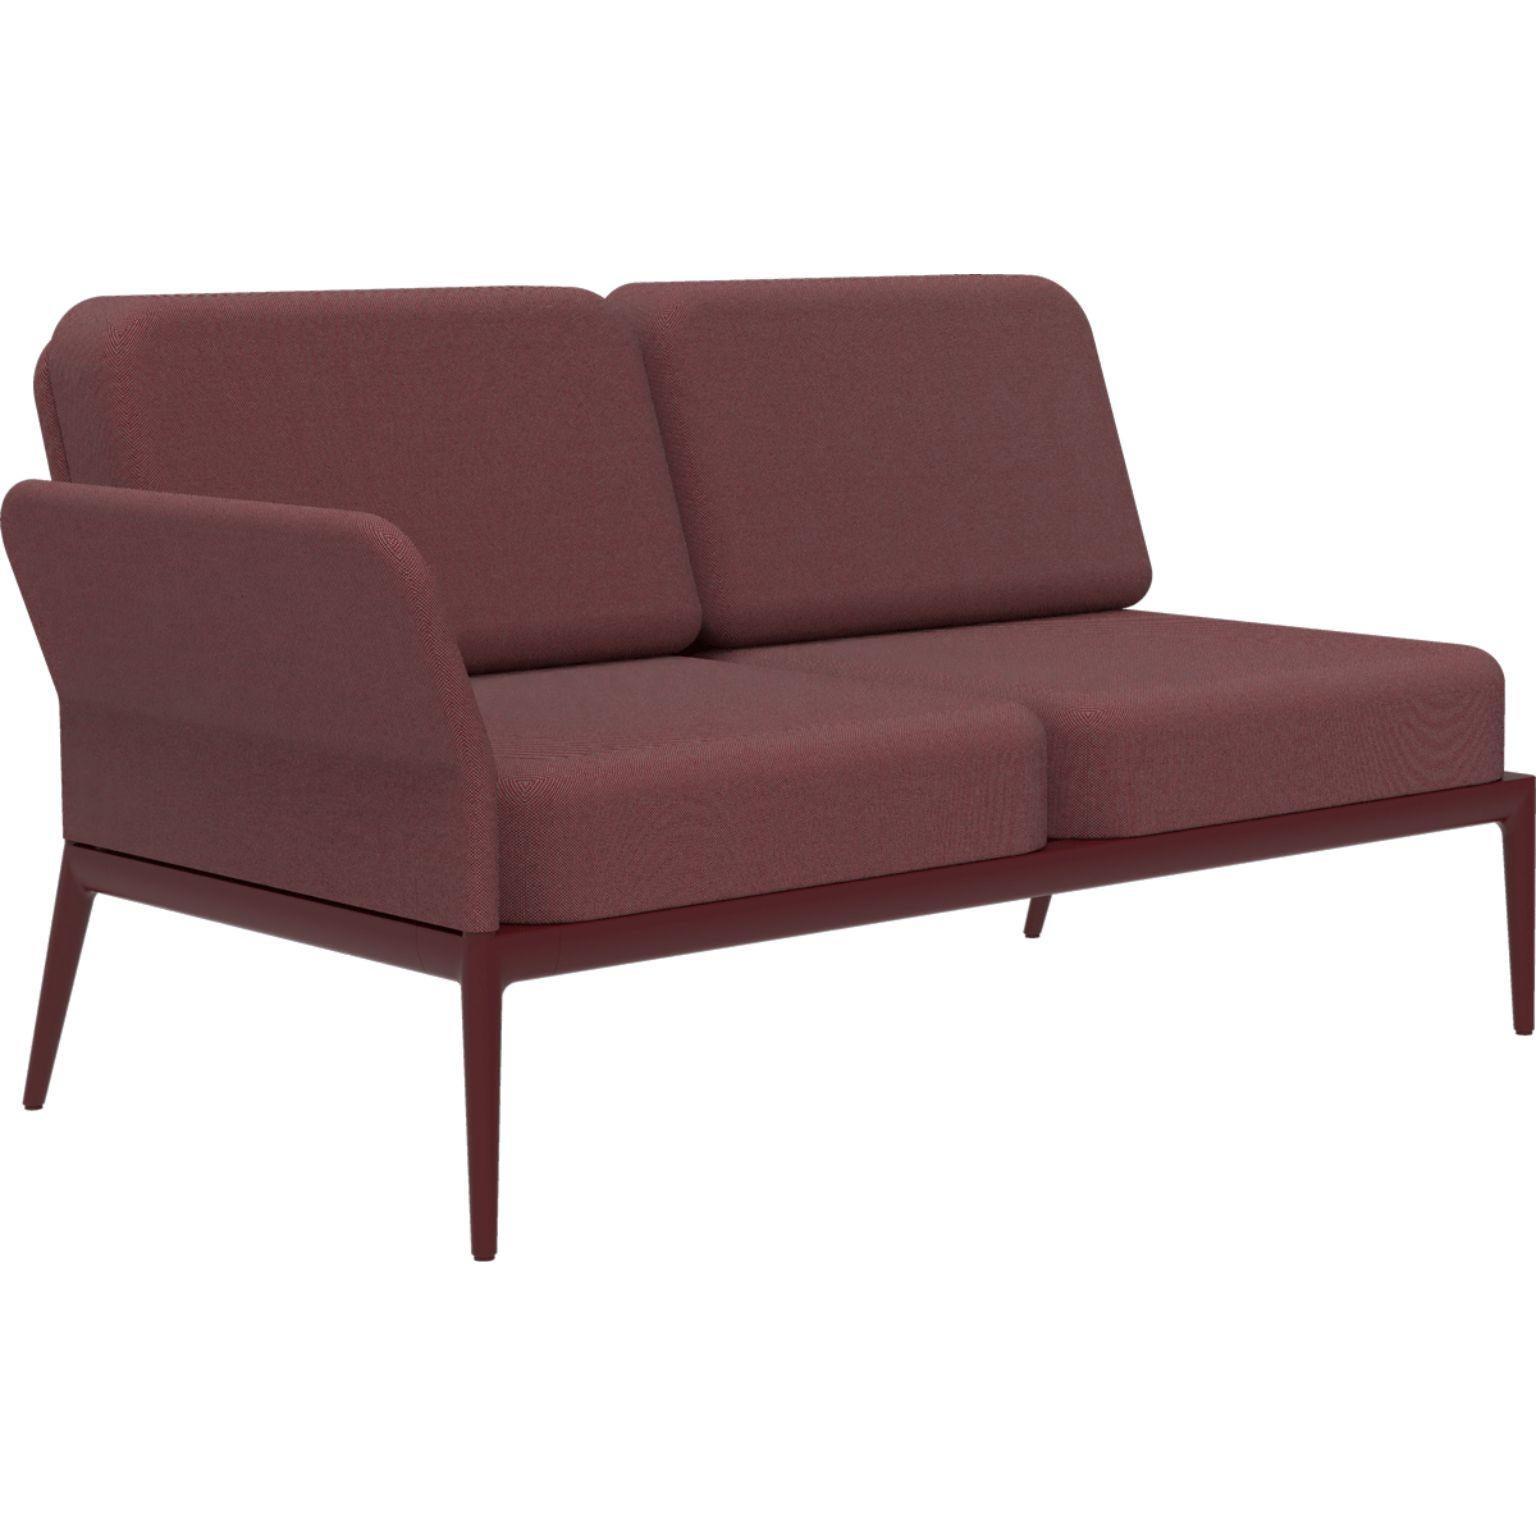 Cover Burgundy Double Right Modular Sofa by MOWEE
Dimensions: D83 x W148 x H81 cm (seat height 42 cm).
Material: Aluminum and upholstery.
Weight: 29 kg.
Also available in different colors and finishes. 

An unmistakable collection for its